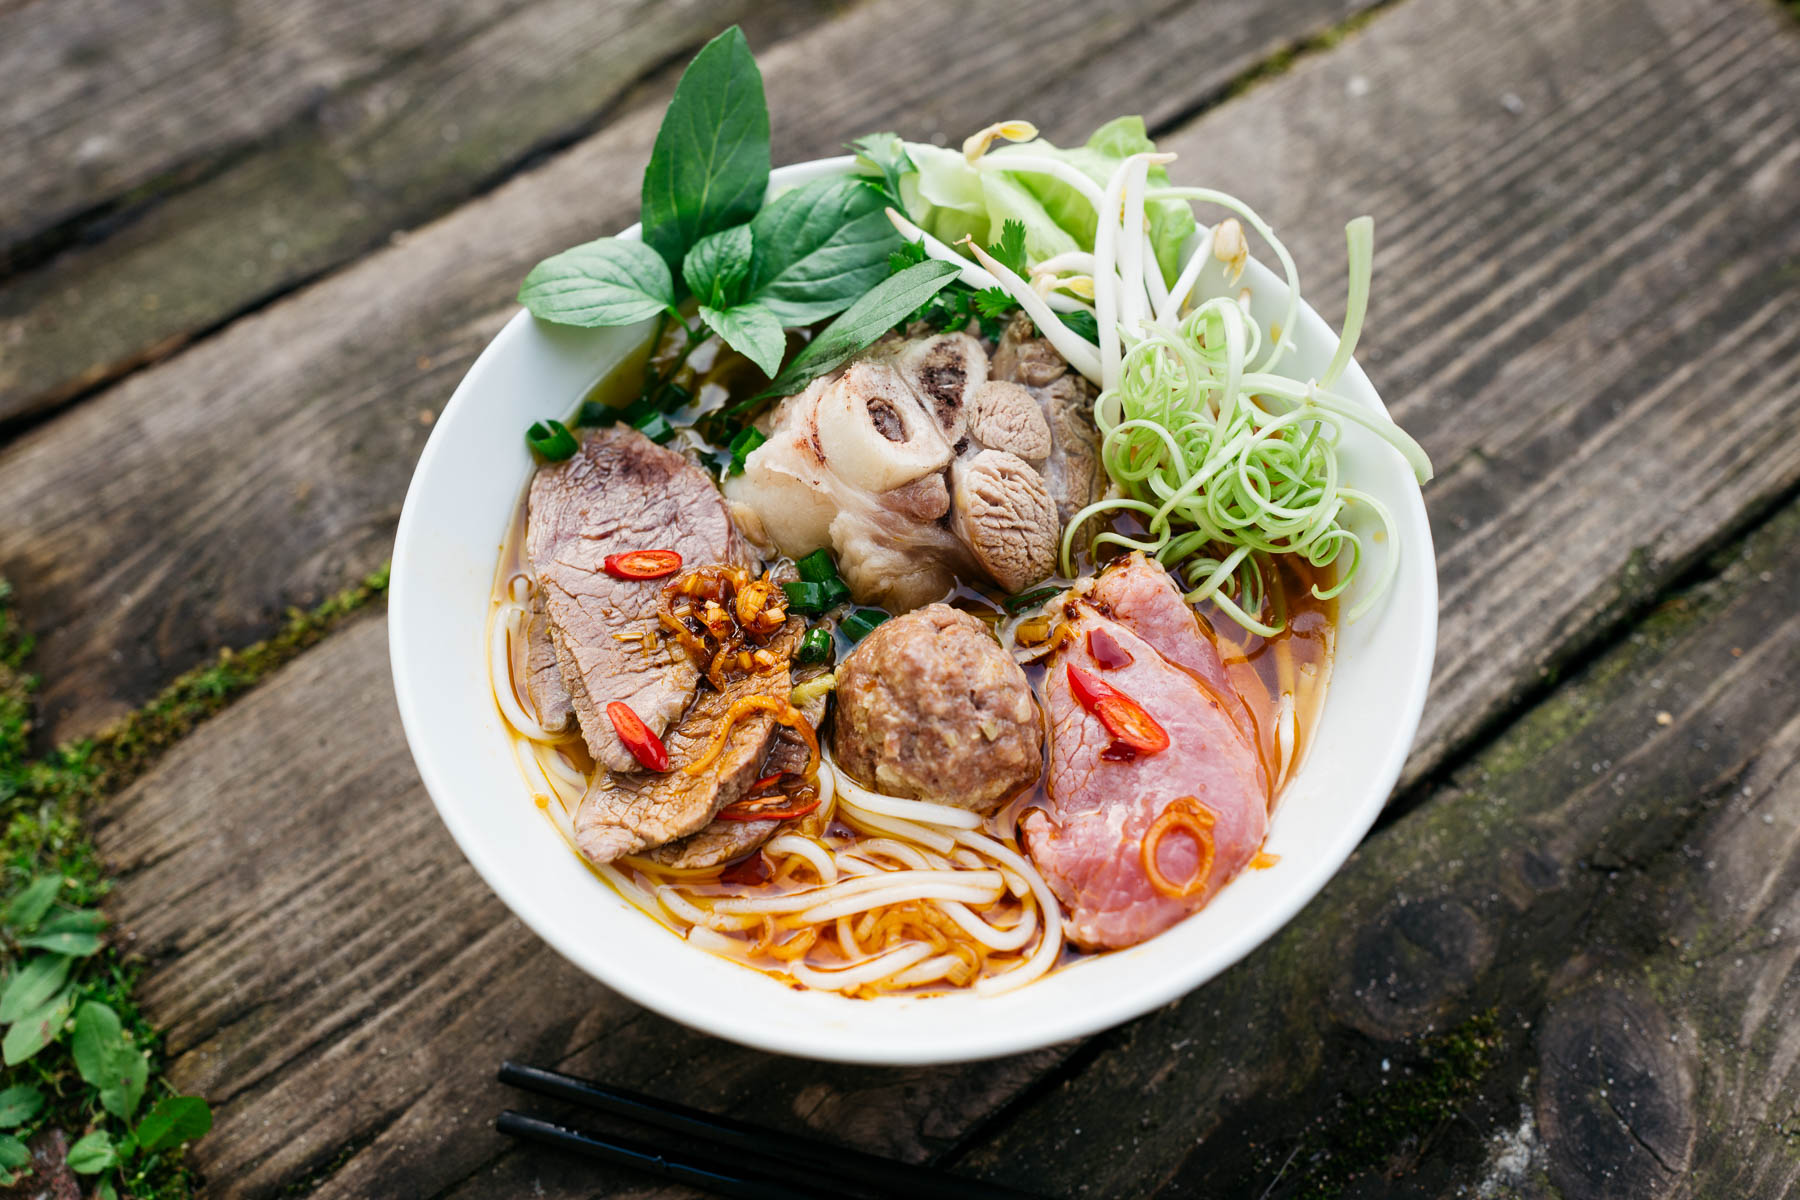 What are best places to get Bun Bo Hue